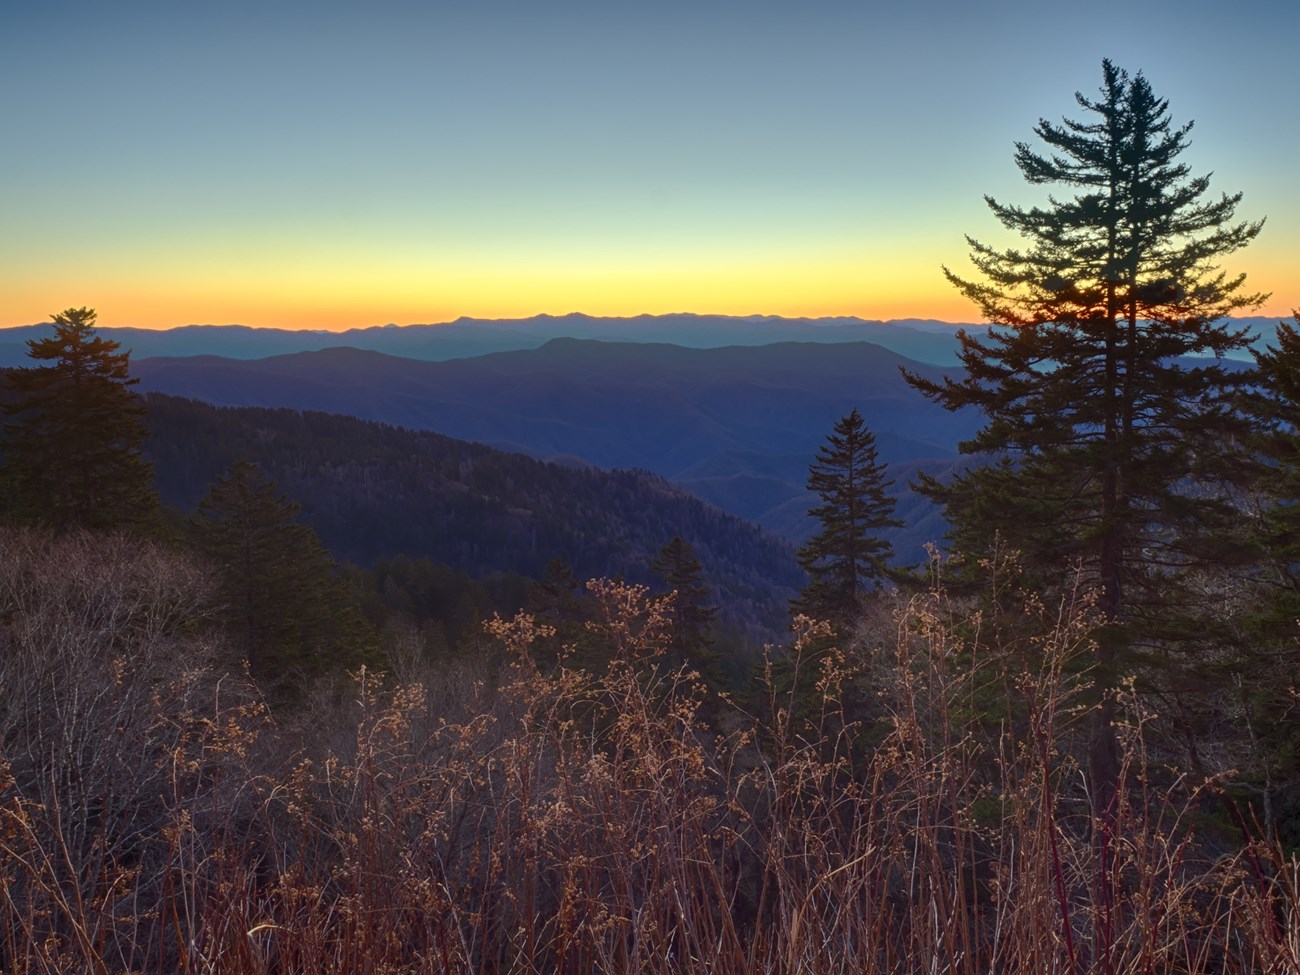 Twilight on Clingmans Dome Road